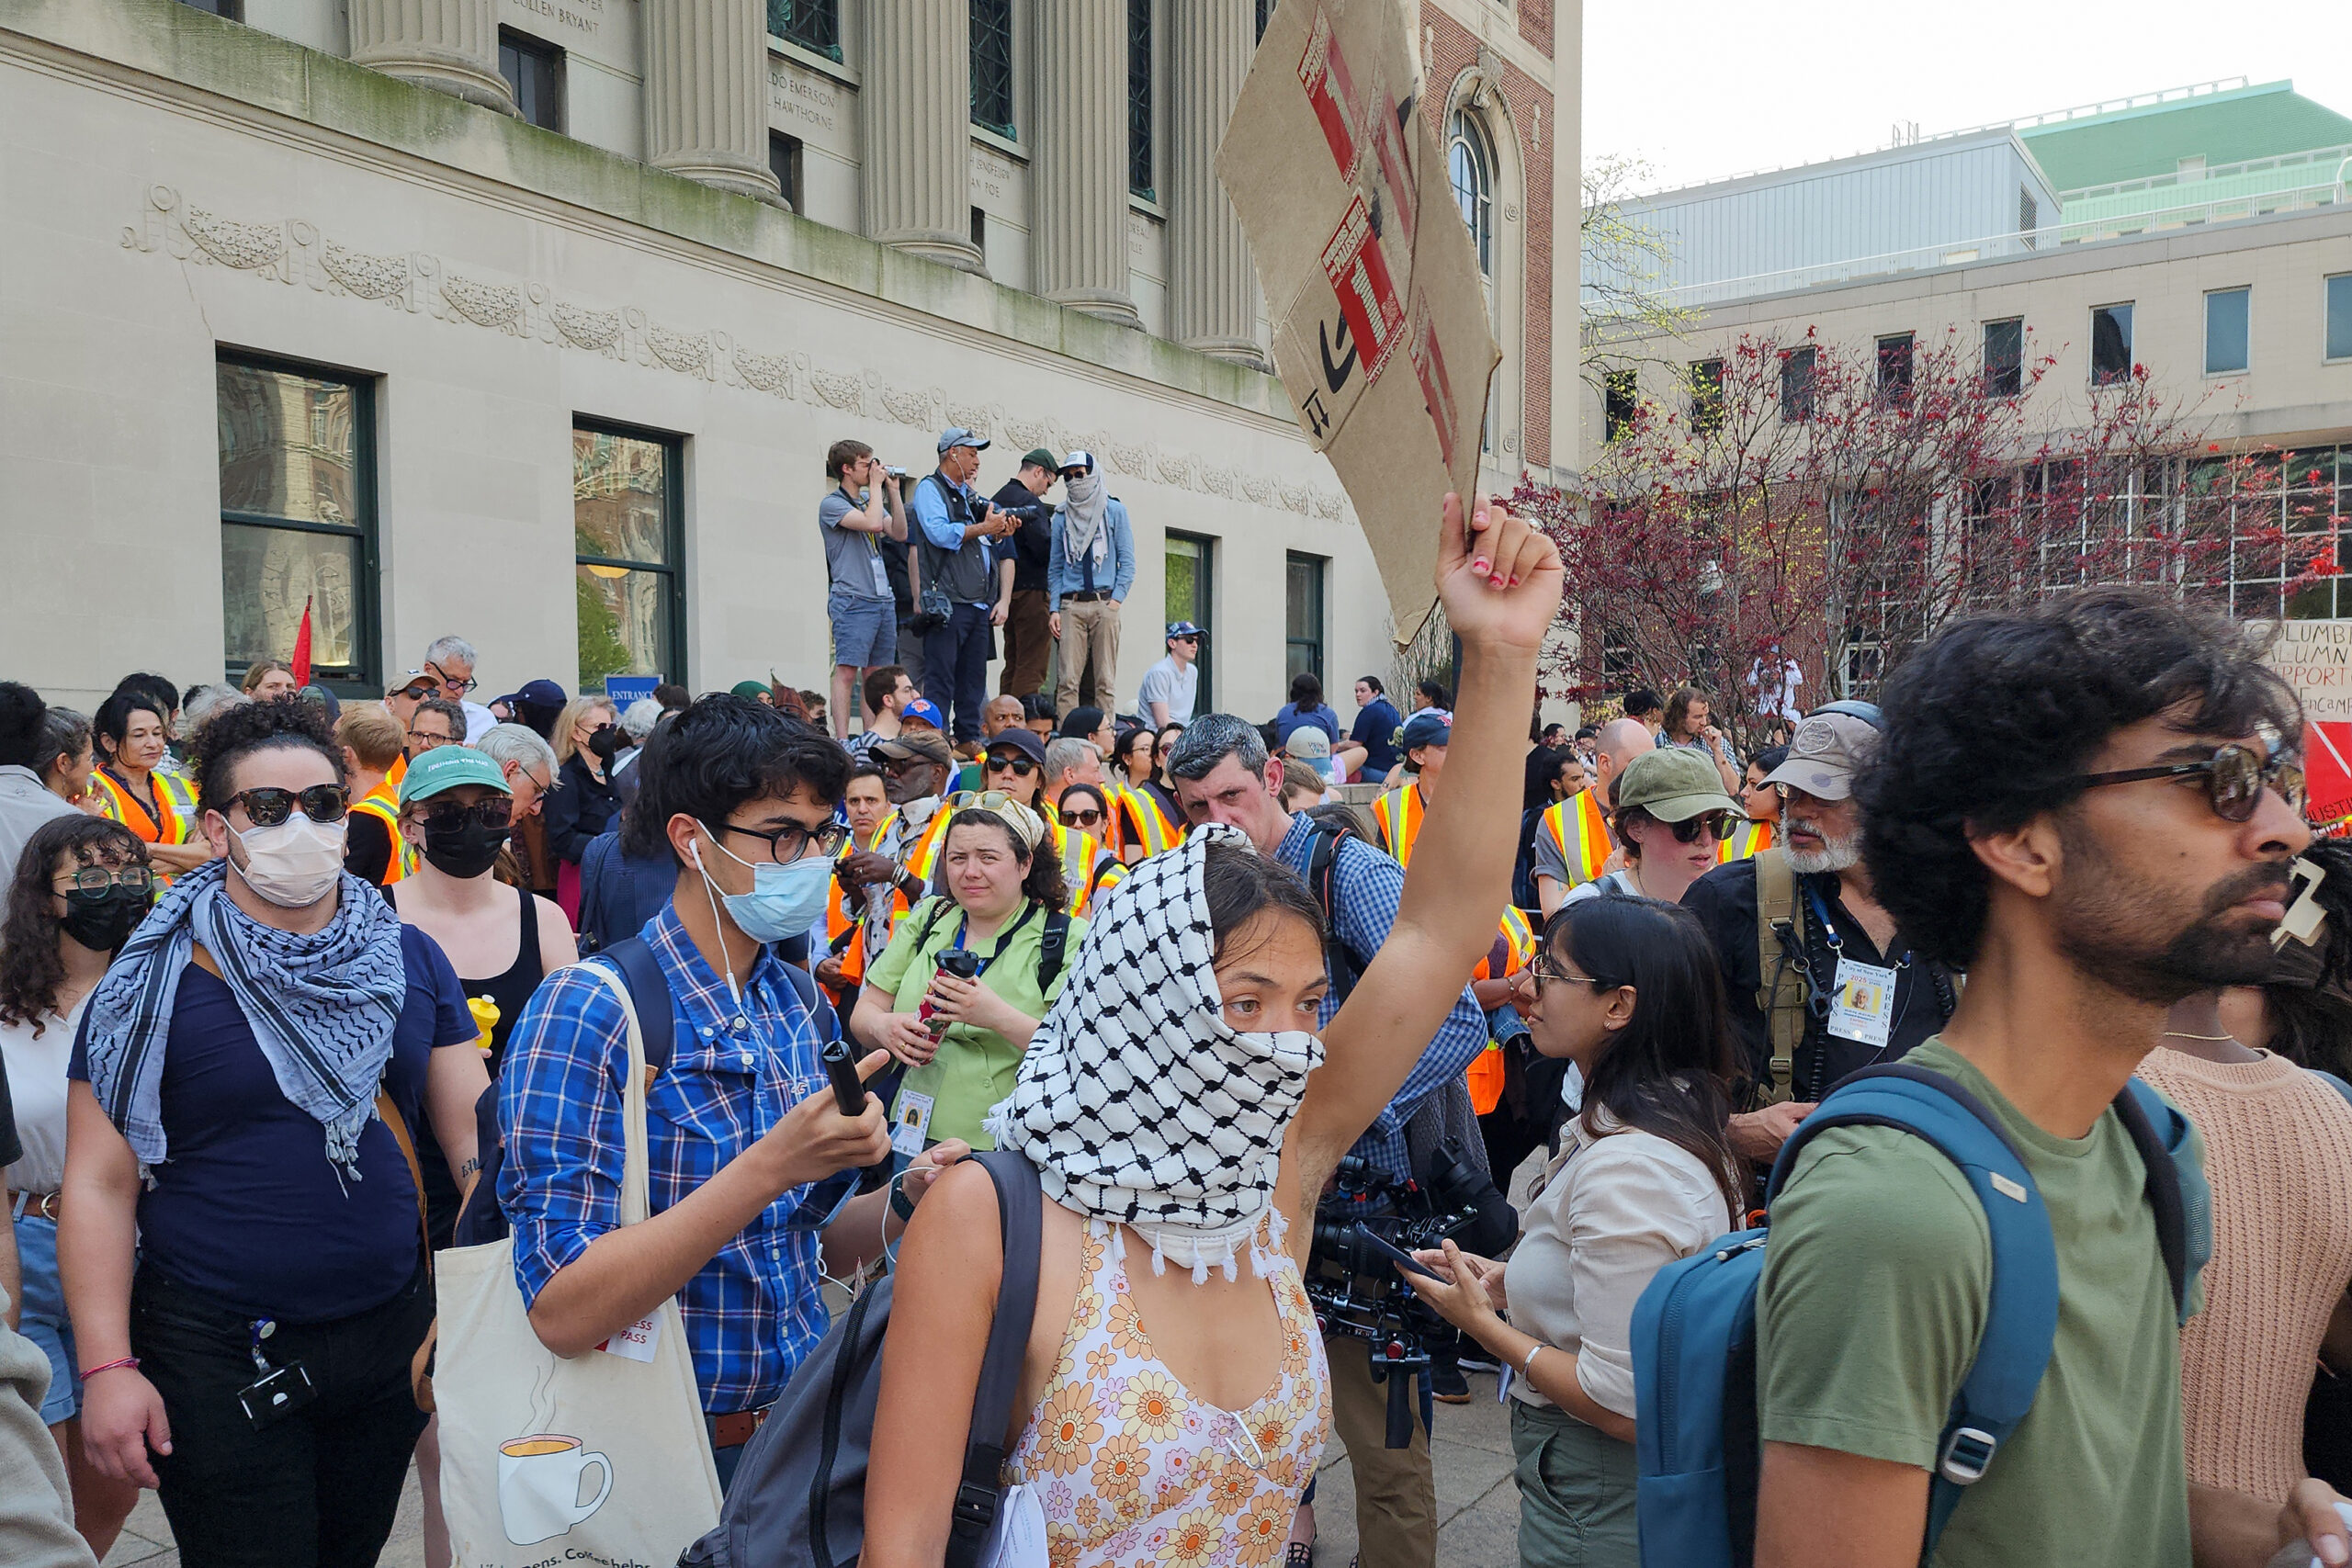 columbia-university-will-not-withdraw-investments-from-israel-despite-student-demands